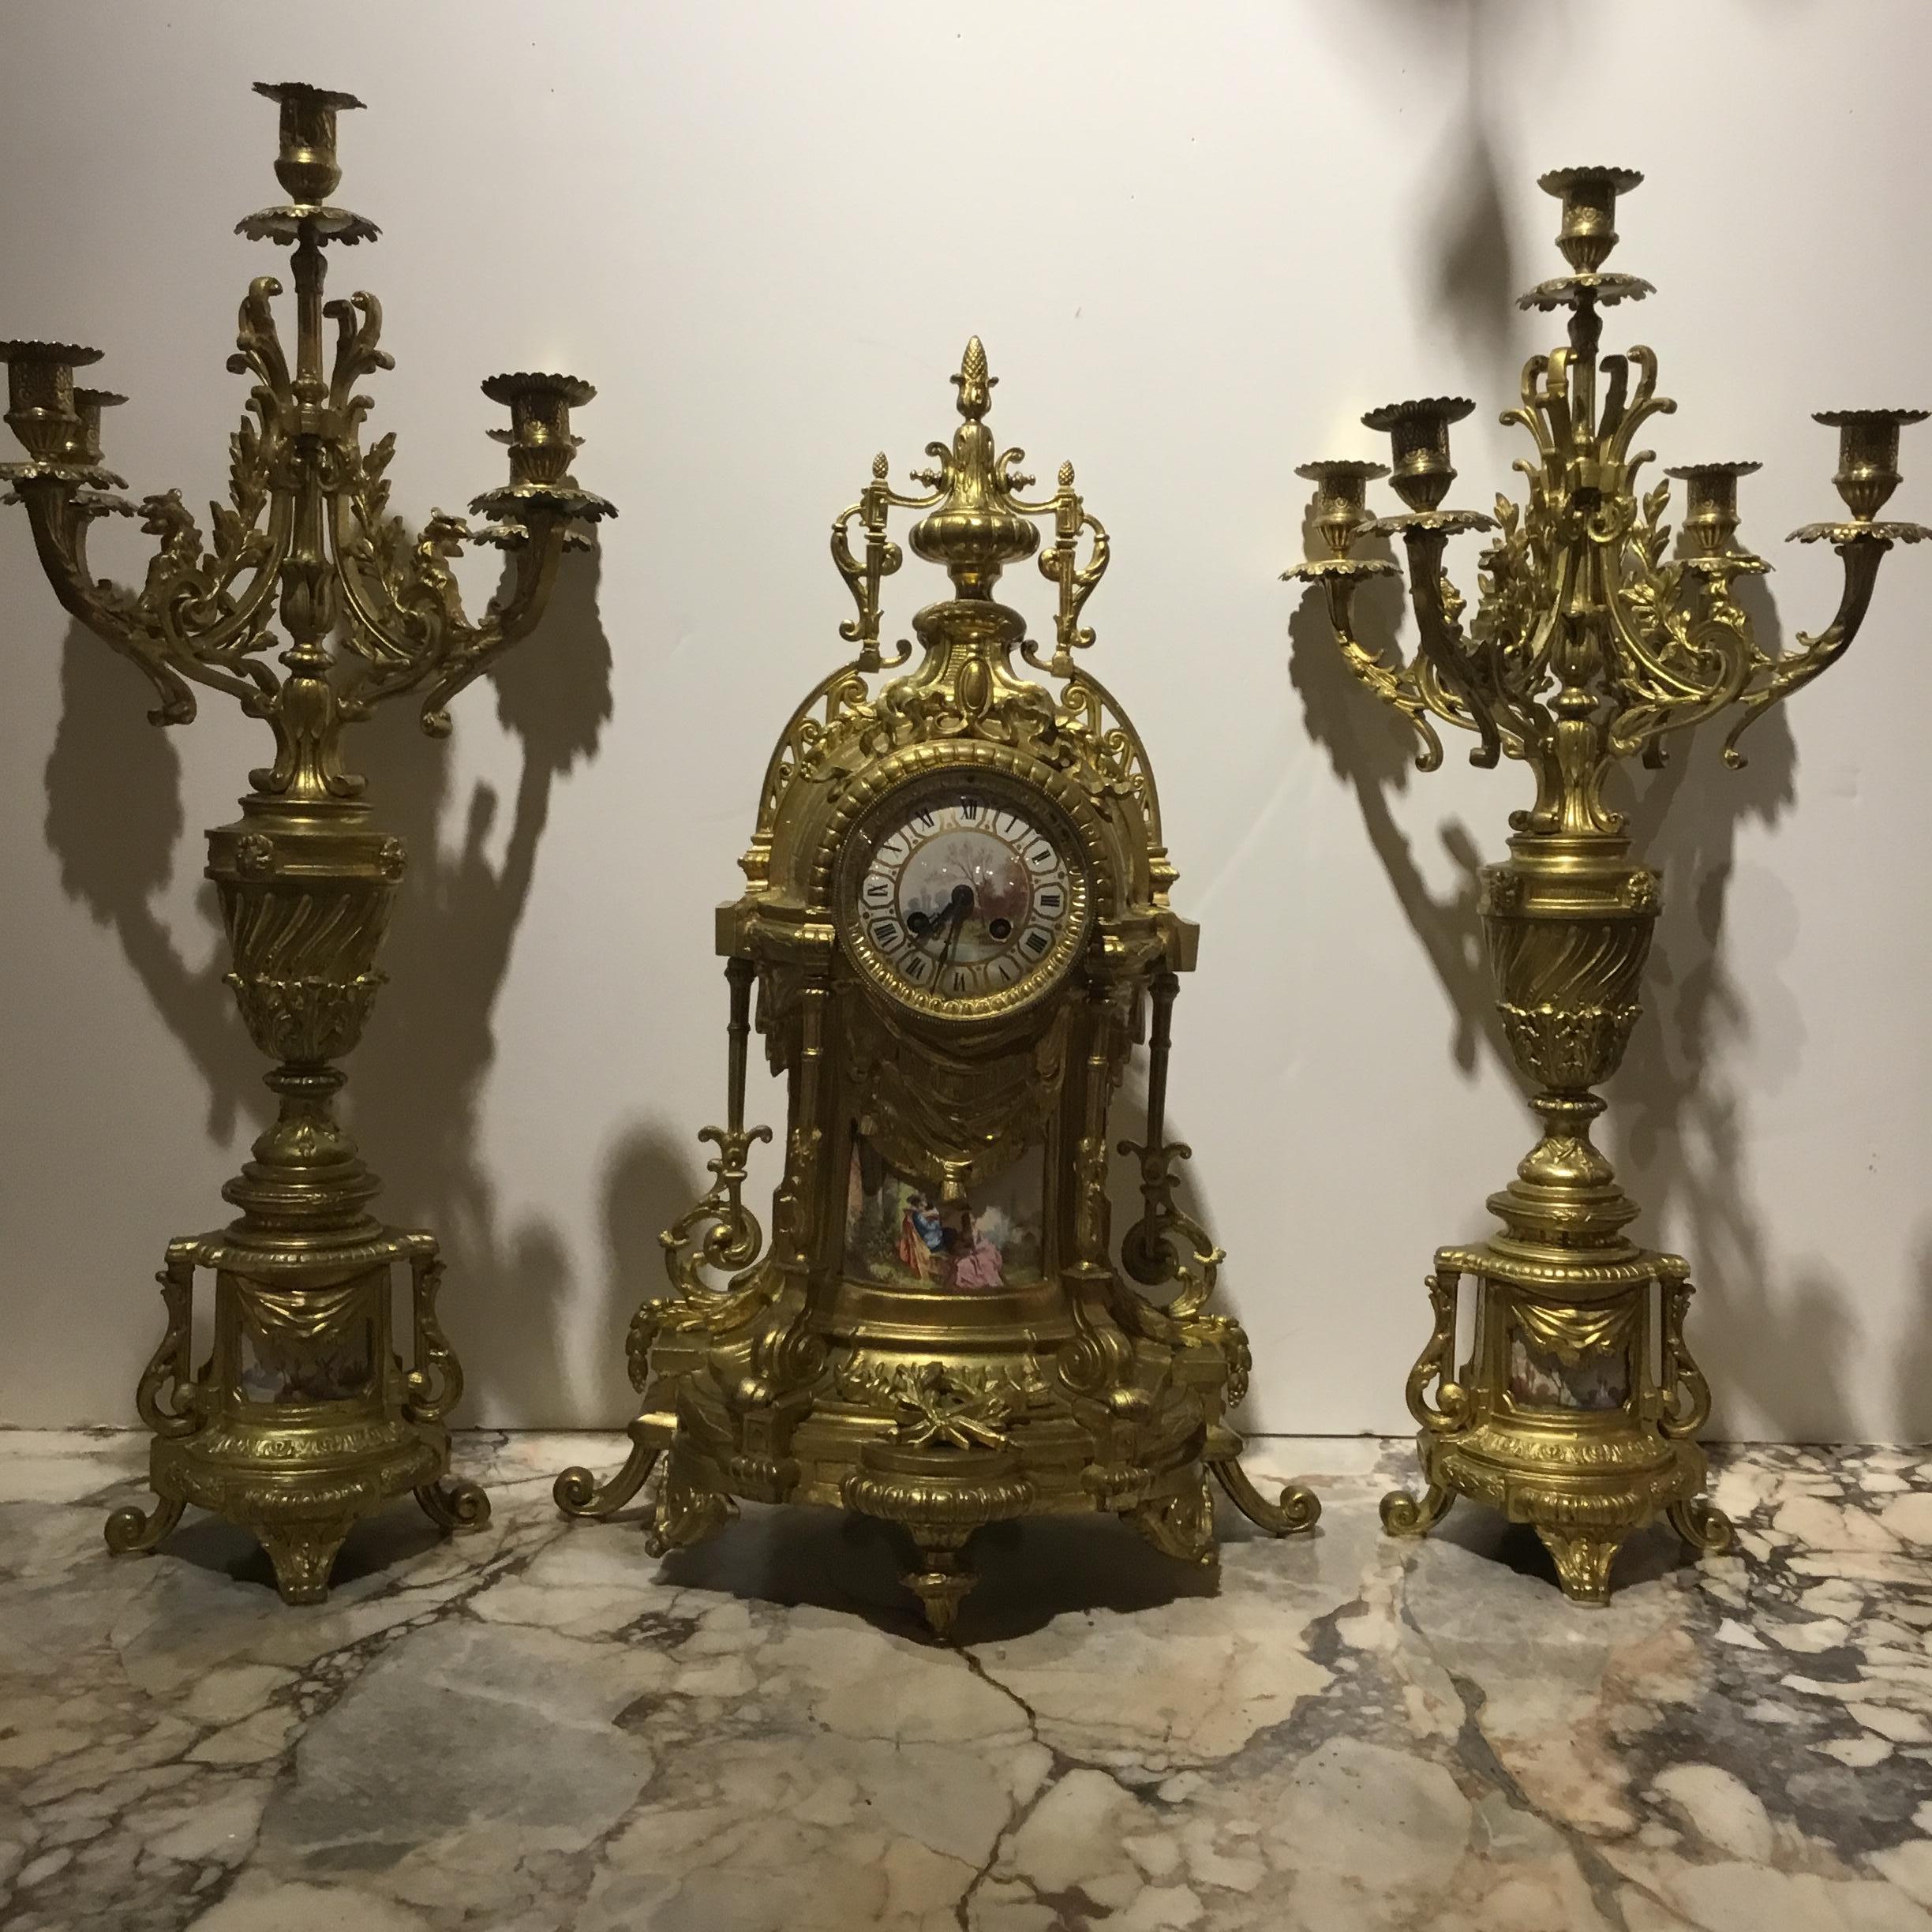 Louis XVI style garniture set. Torch and quiver design is  centered at 
Bottom of the clock. A hand painted garden scene is presented at the
Lower portion of the clock and a beautiful hand painted face depicts
The French landscape. An urn is